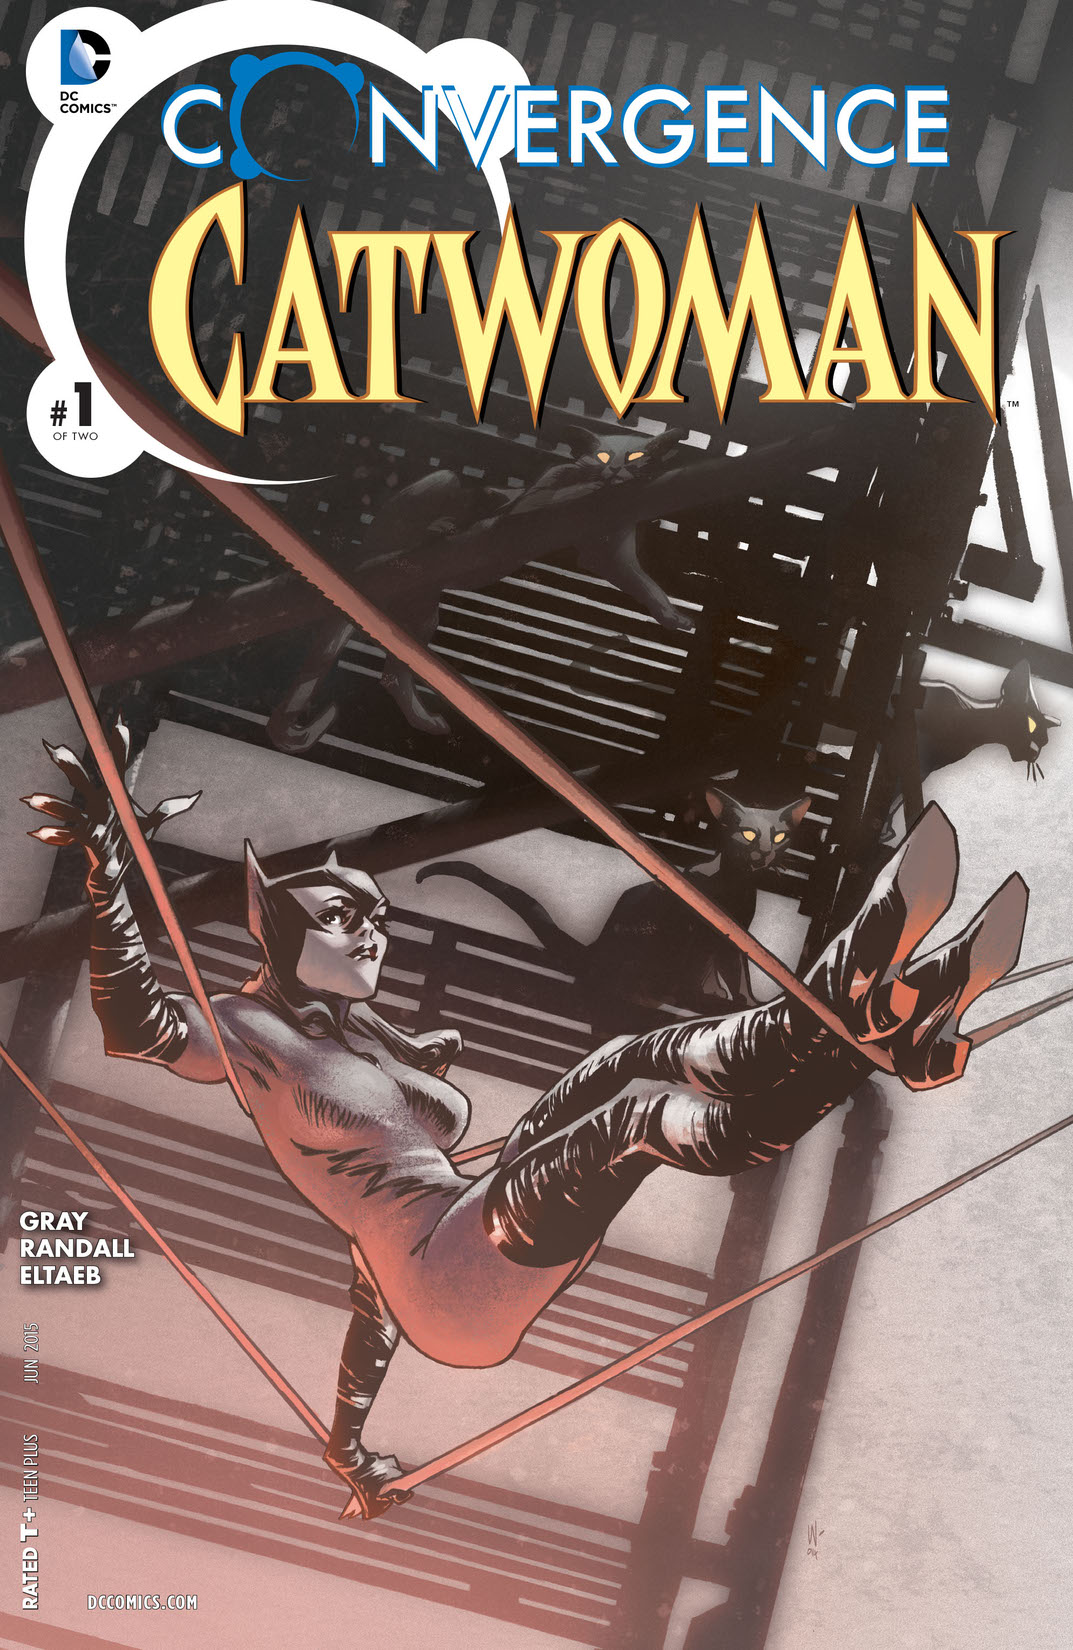 Convergence: Catwoman #1 preview images